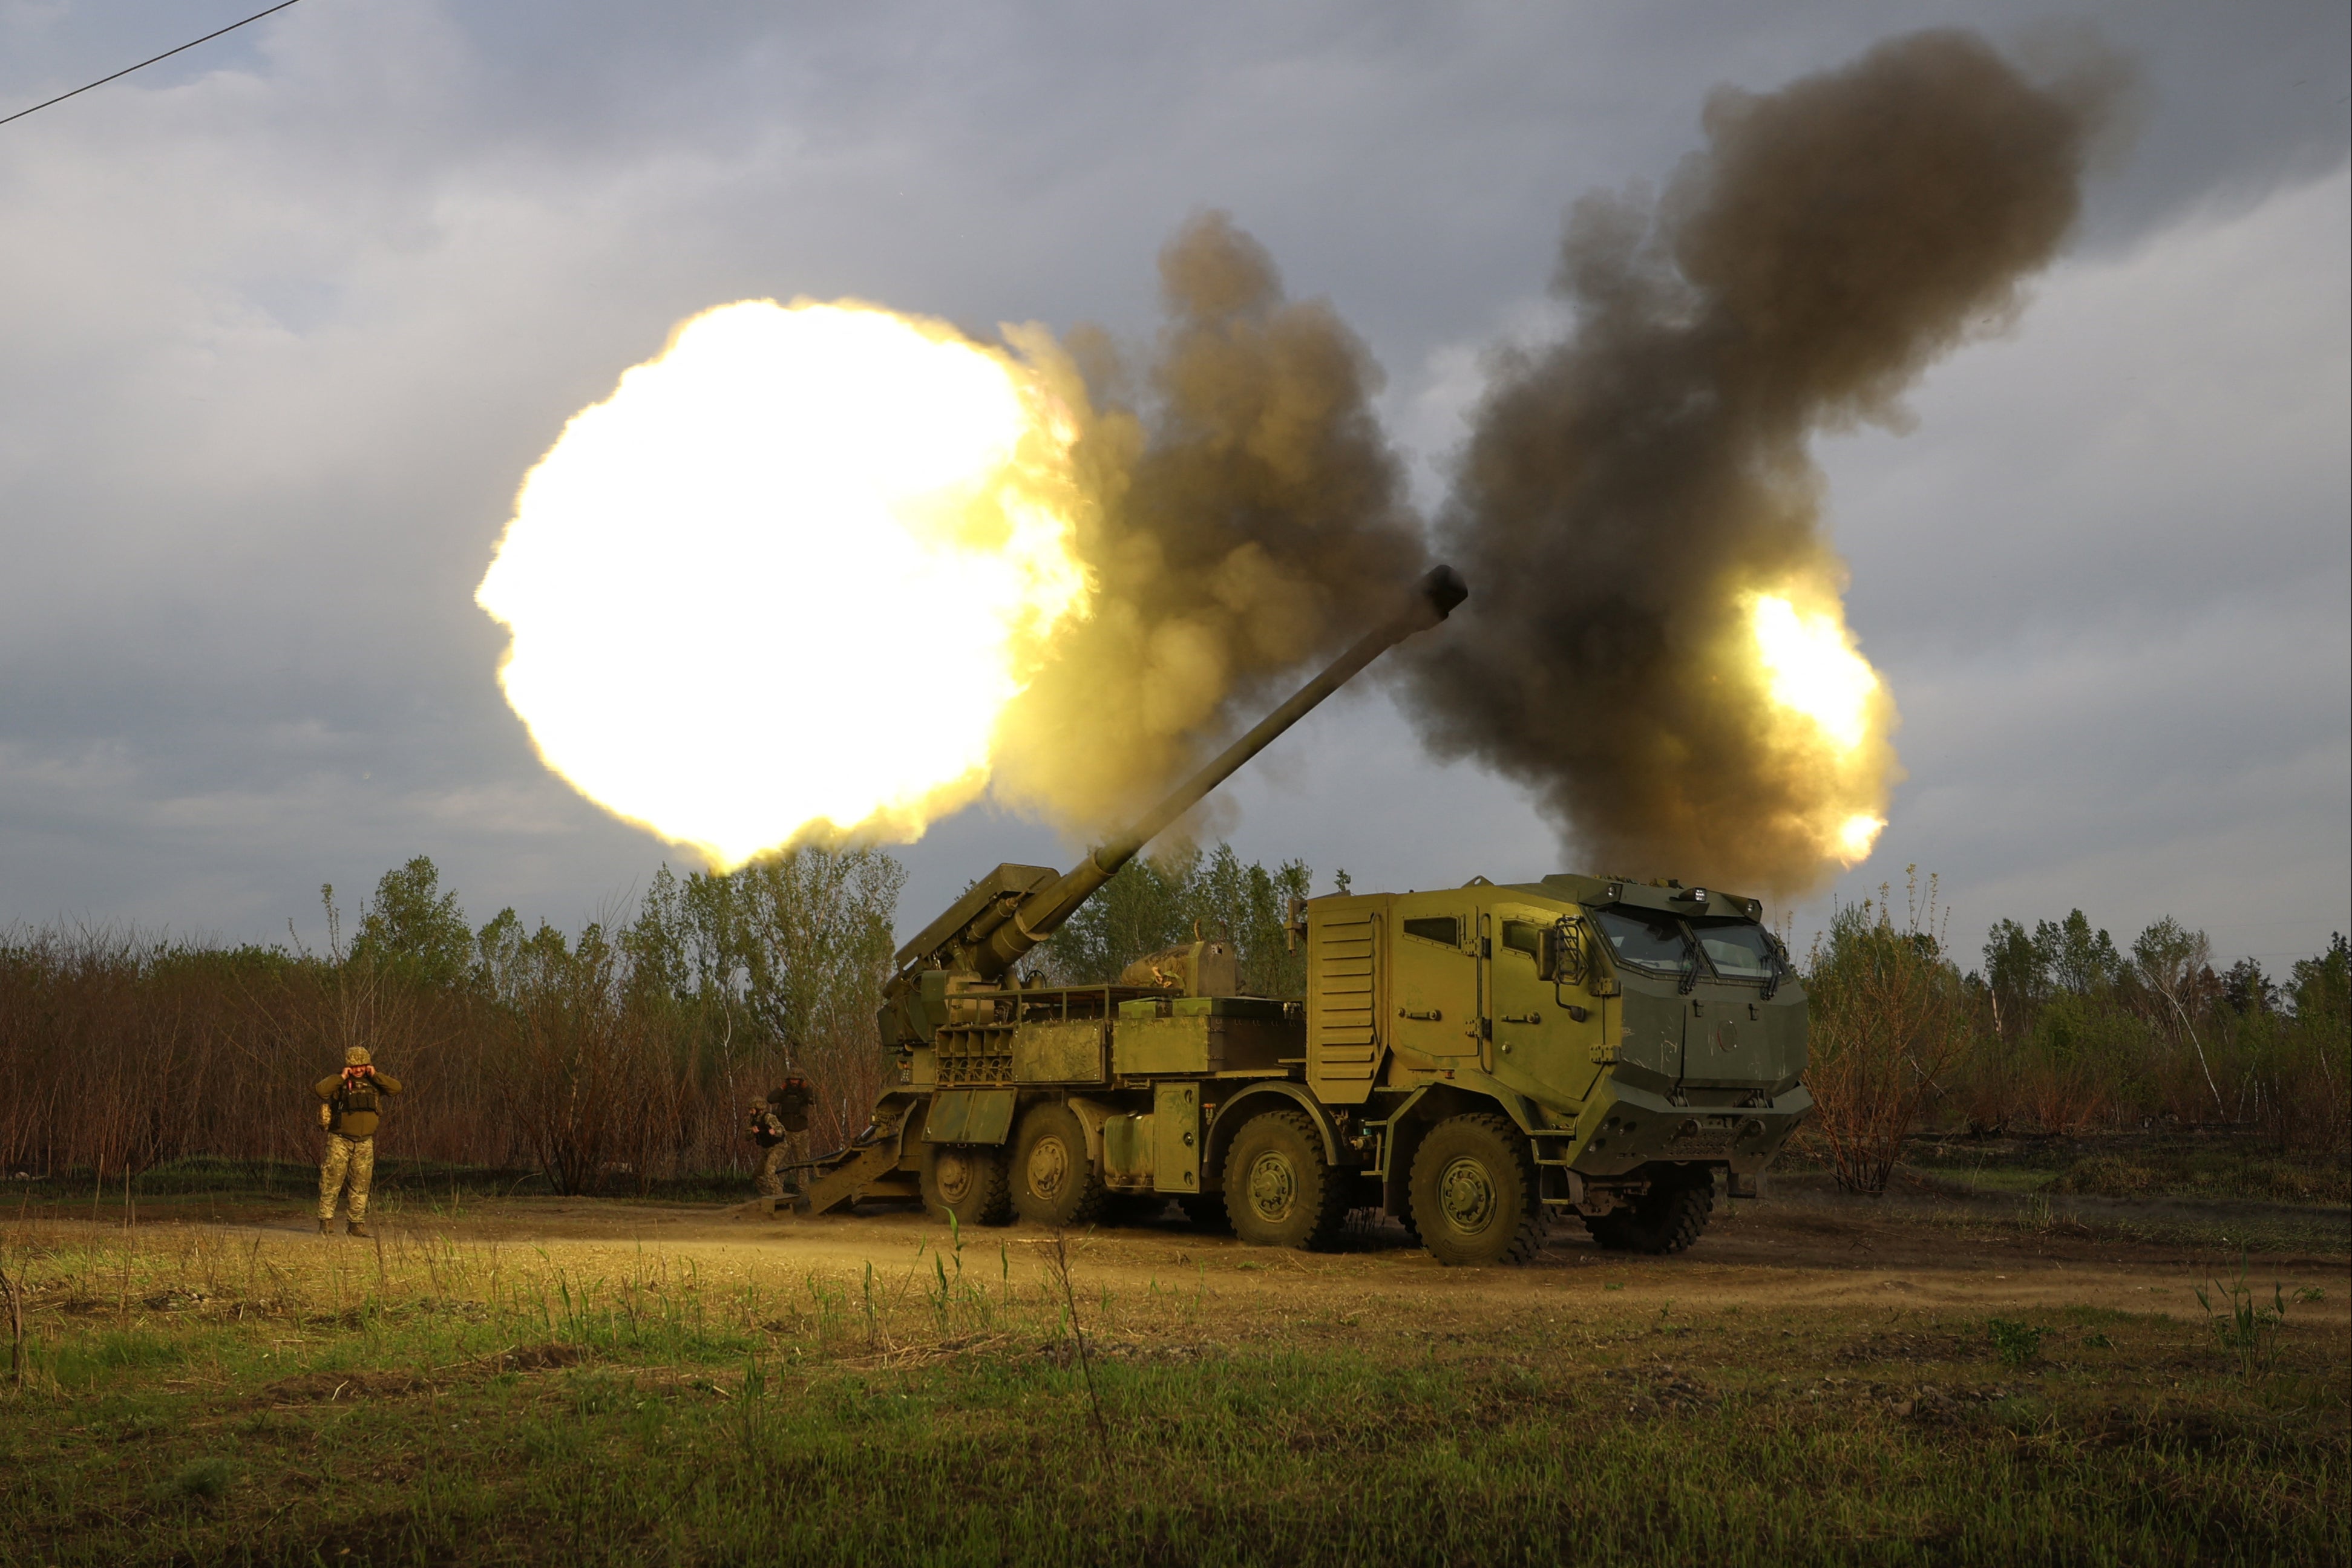 Gunners from Ukraine’s 43rd Separate Mechanized Brigade fire at Russian positions in Kharkiv